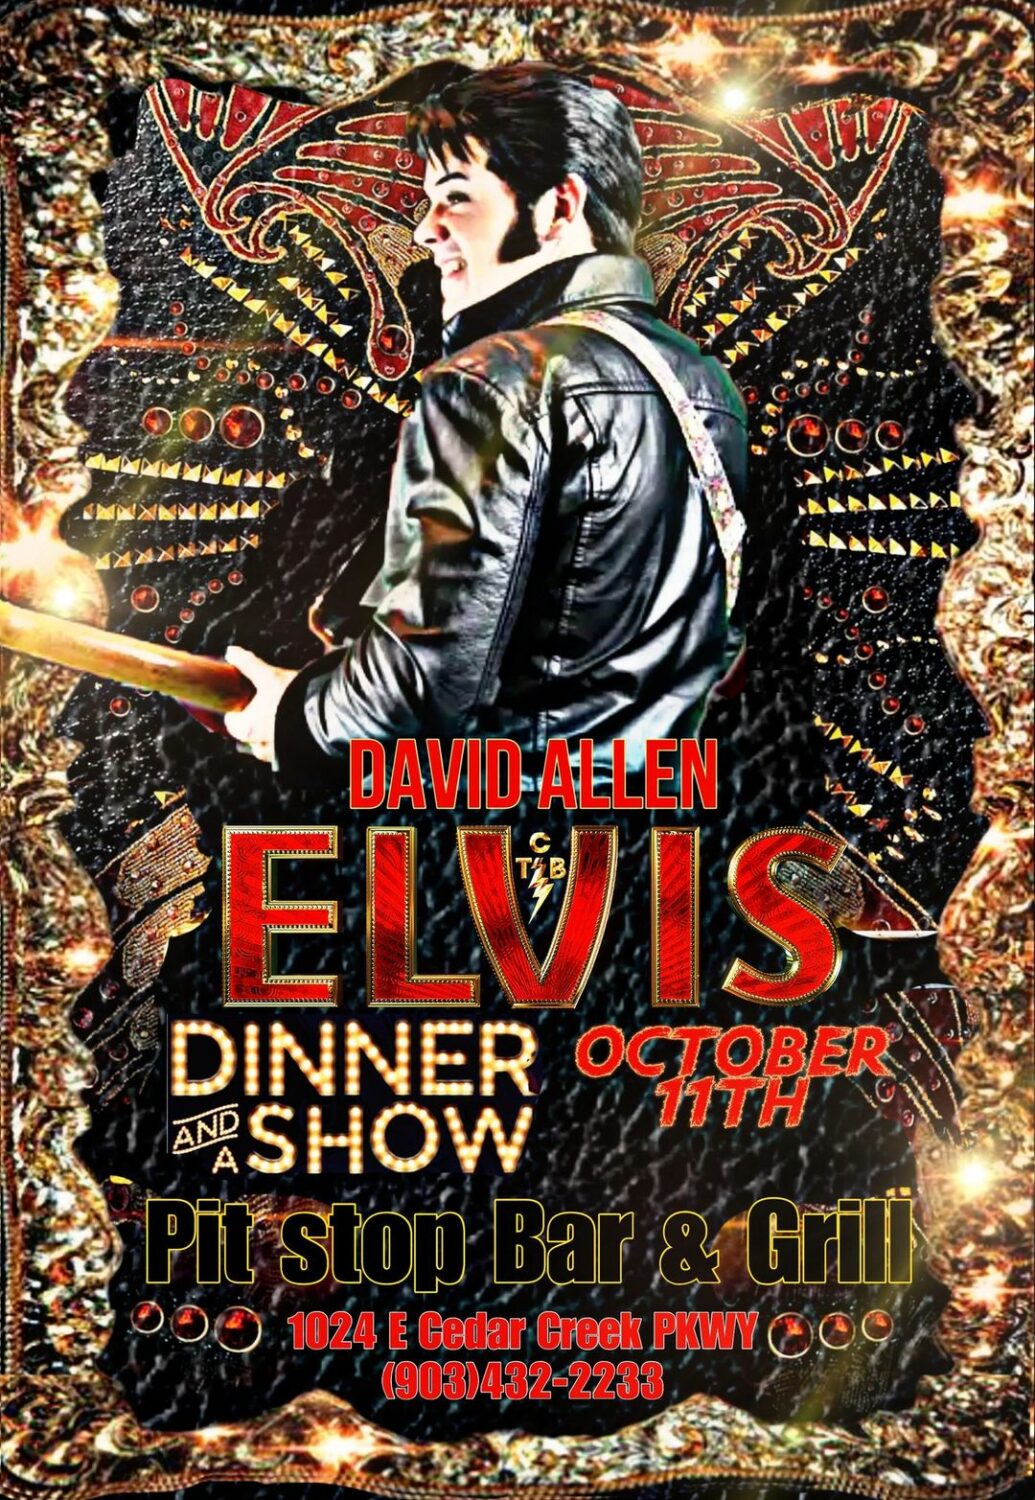 David Allen Elvis Impersonator Dinner And A Show at The Pit Stop Bar and Grill